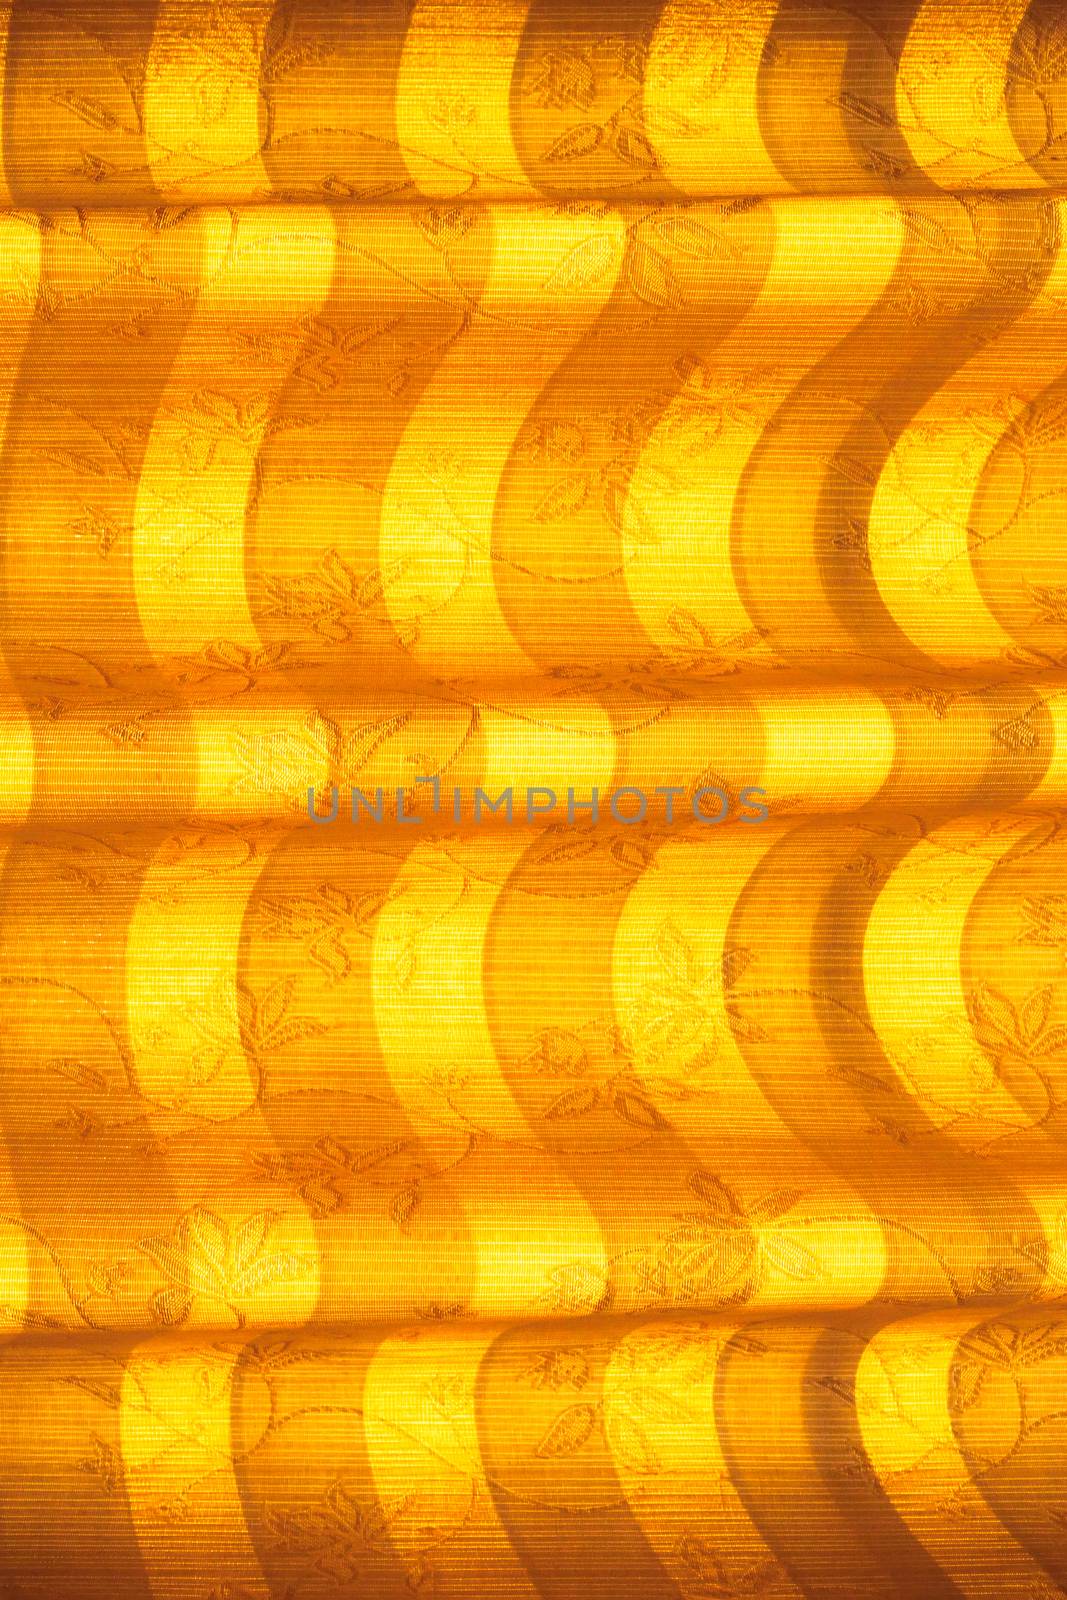 Warm tone blinds or curtains and abstract natural sunlight by nopparats